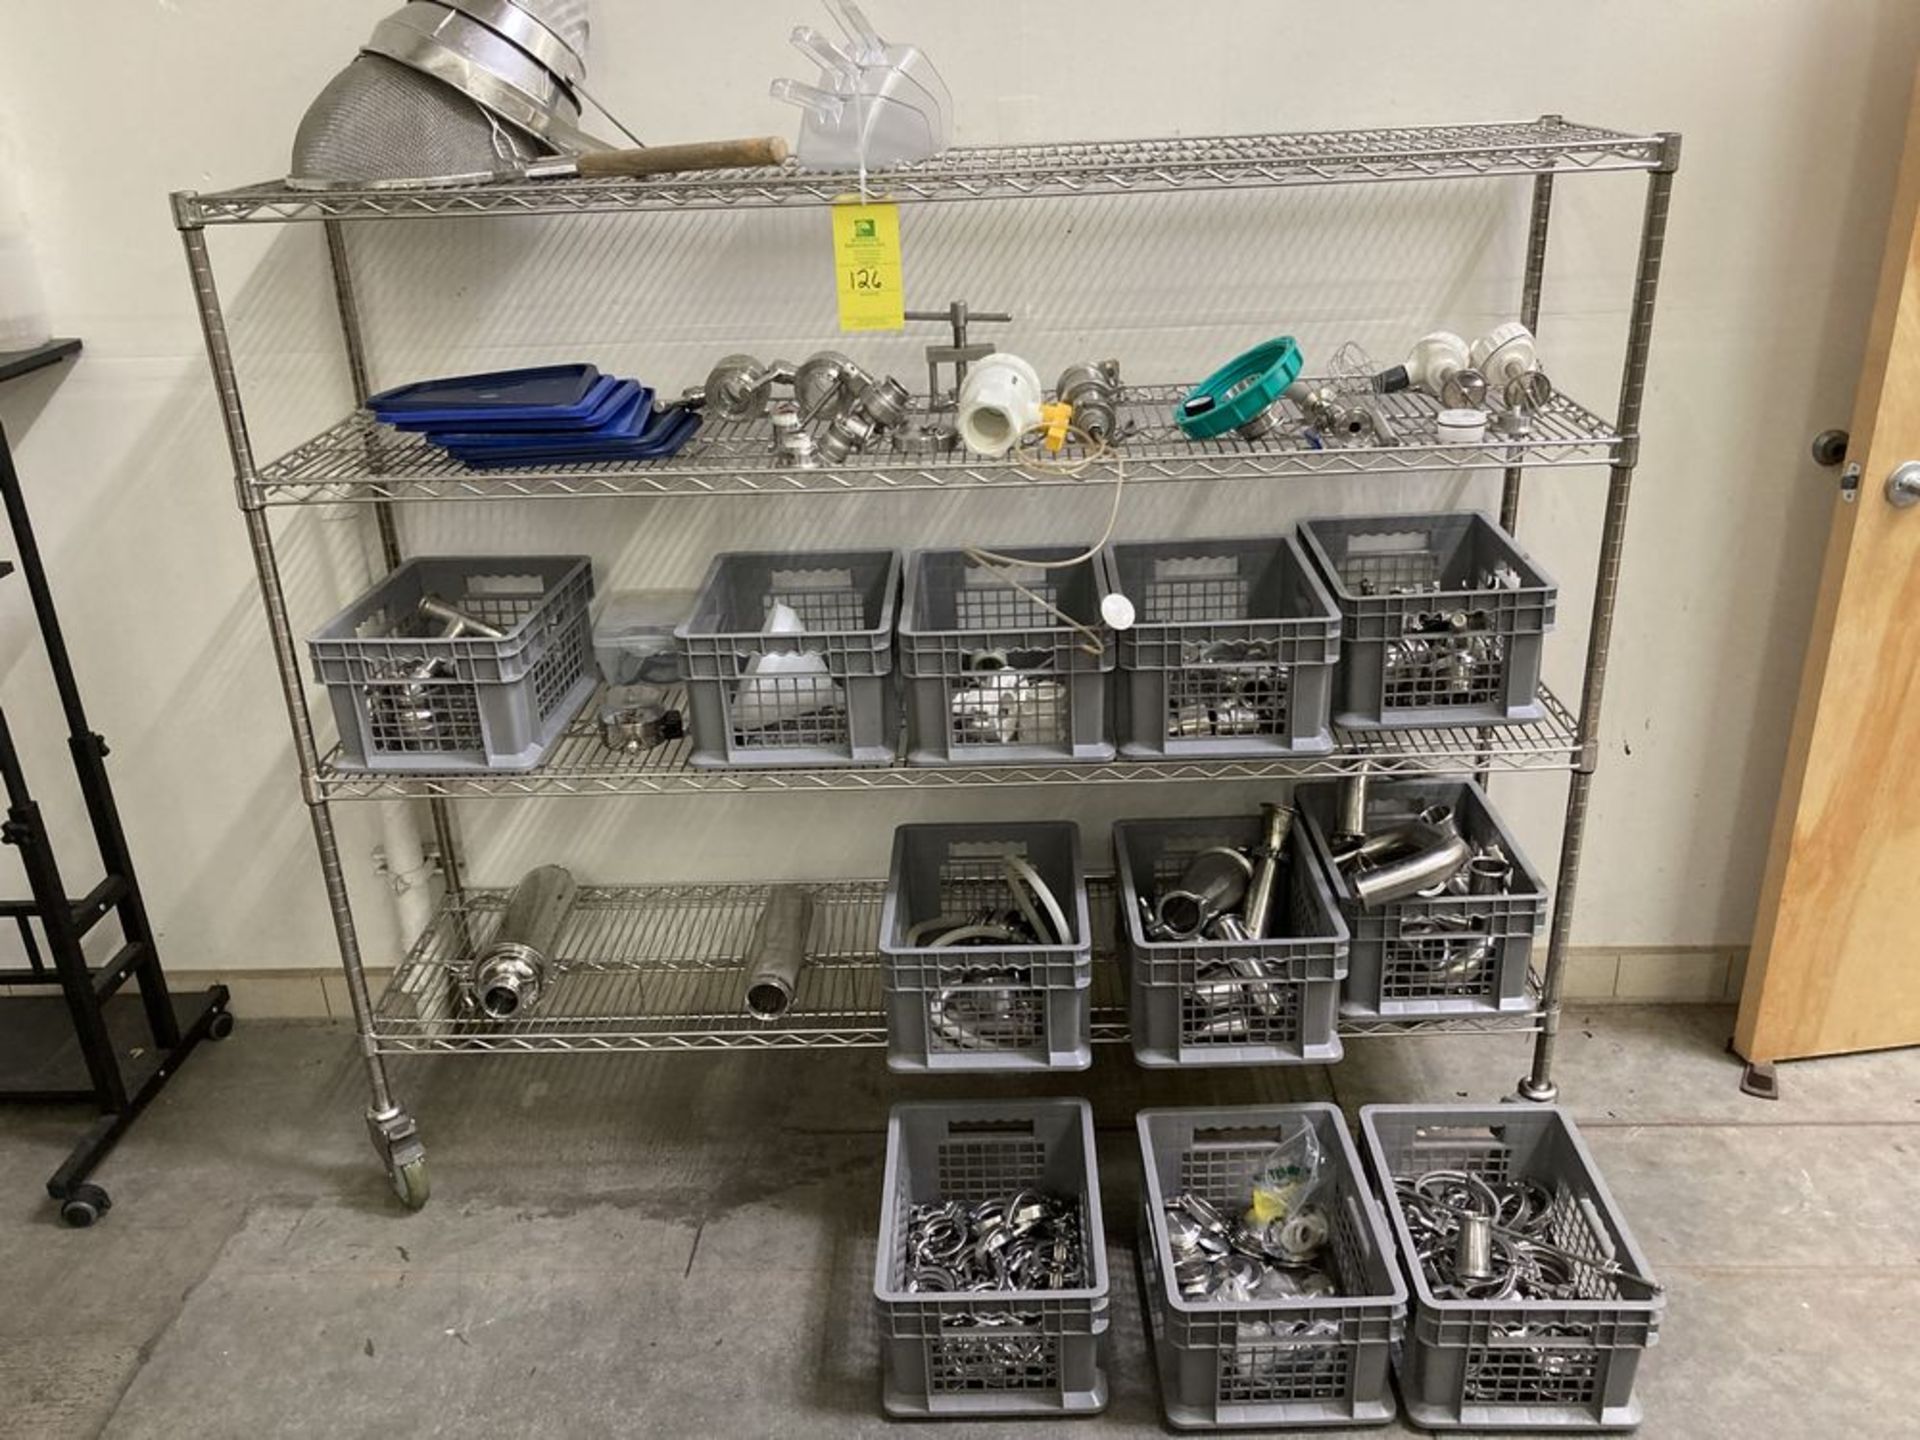 LOT OF MISC, tri-clamps, valves, measuring containers, shelf unit. ***Rigging and Loading Fee of $